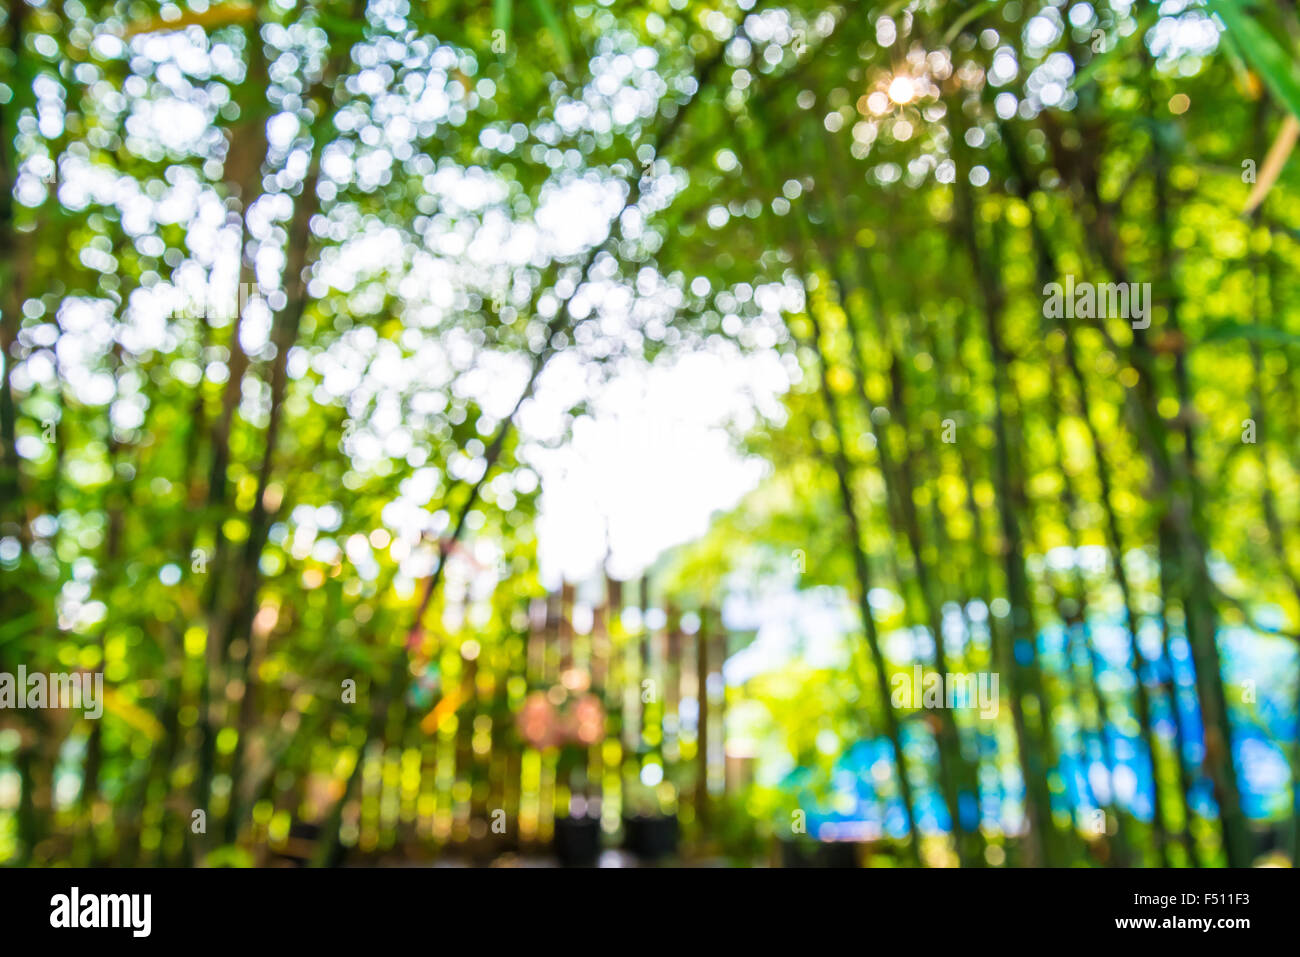 Zoom Shot Out Of Focus Bamboo For Background Bokeh Stock Photo Alamy